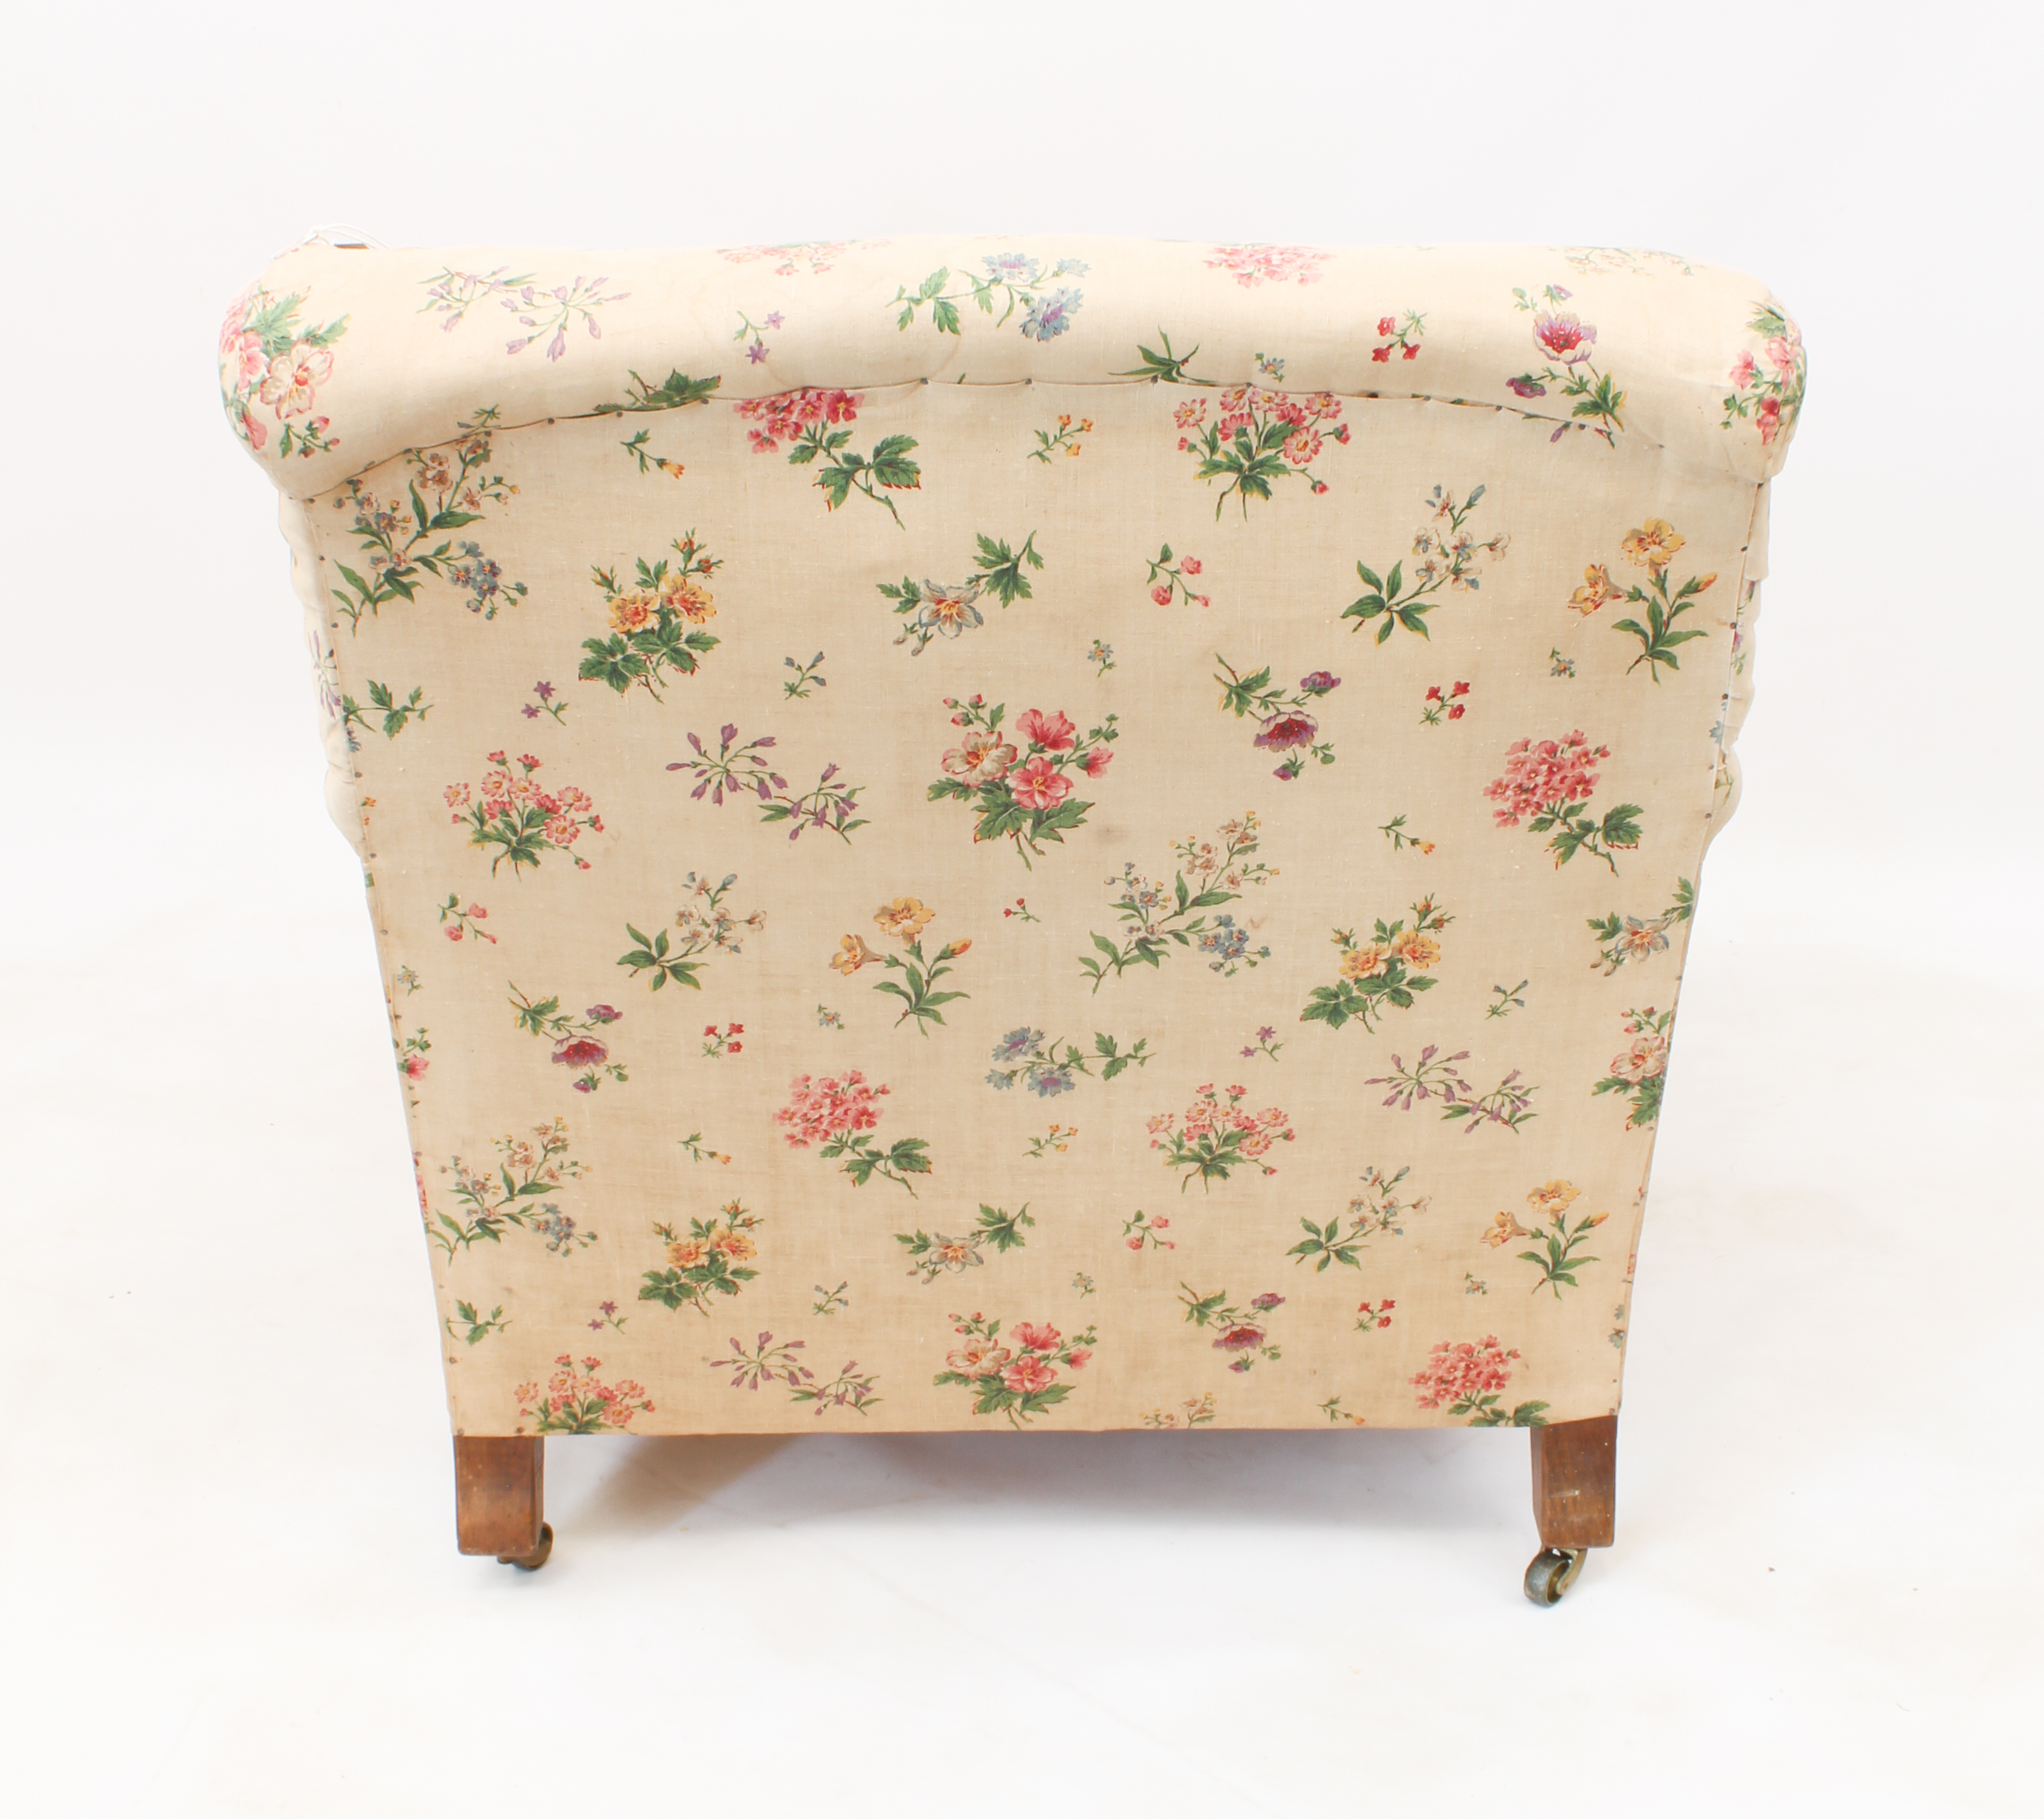 An early 20th century armchair by Howard & Sons - upholstered in early 20th century printed floral - Bild 4 aus 16